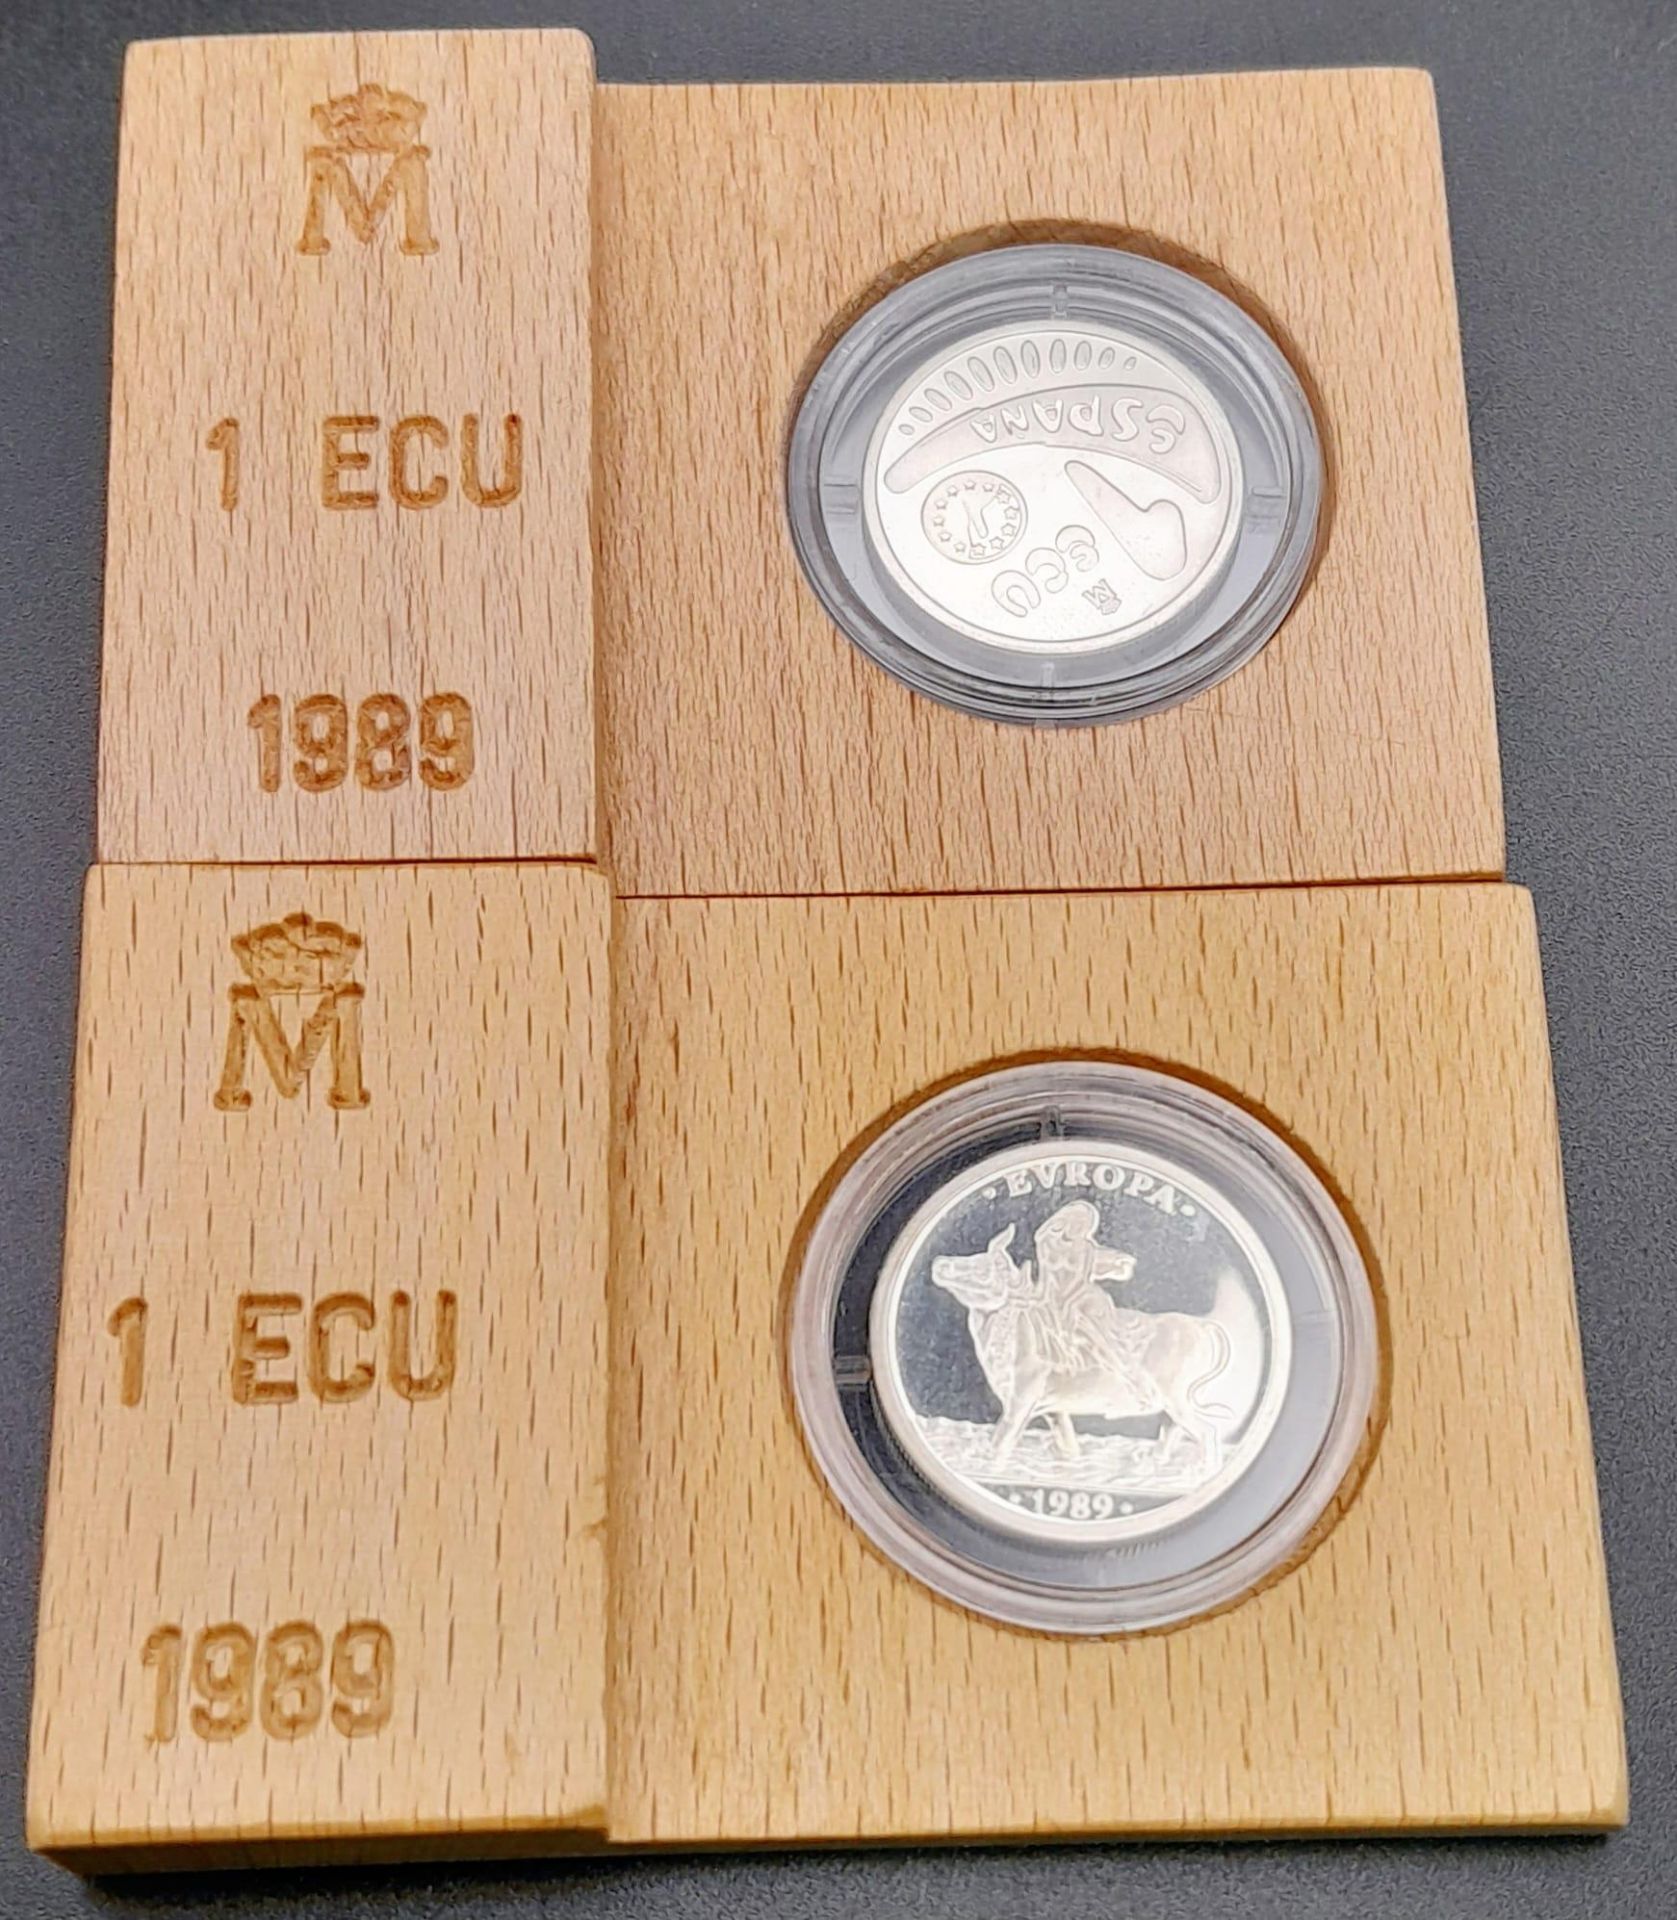 Two Uncirculated 925 Silver 1 ECU Coins in Capsules with Certificate of Authenticity in Wood Display - Image 2 of 3